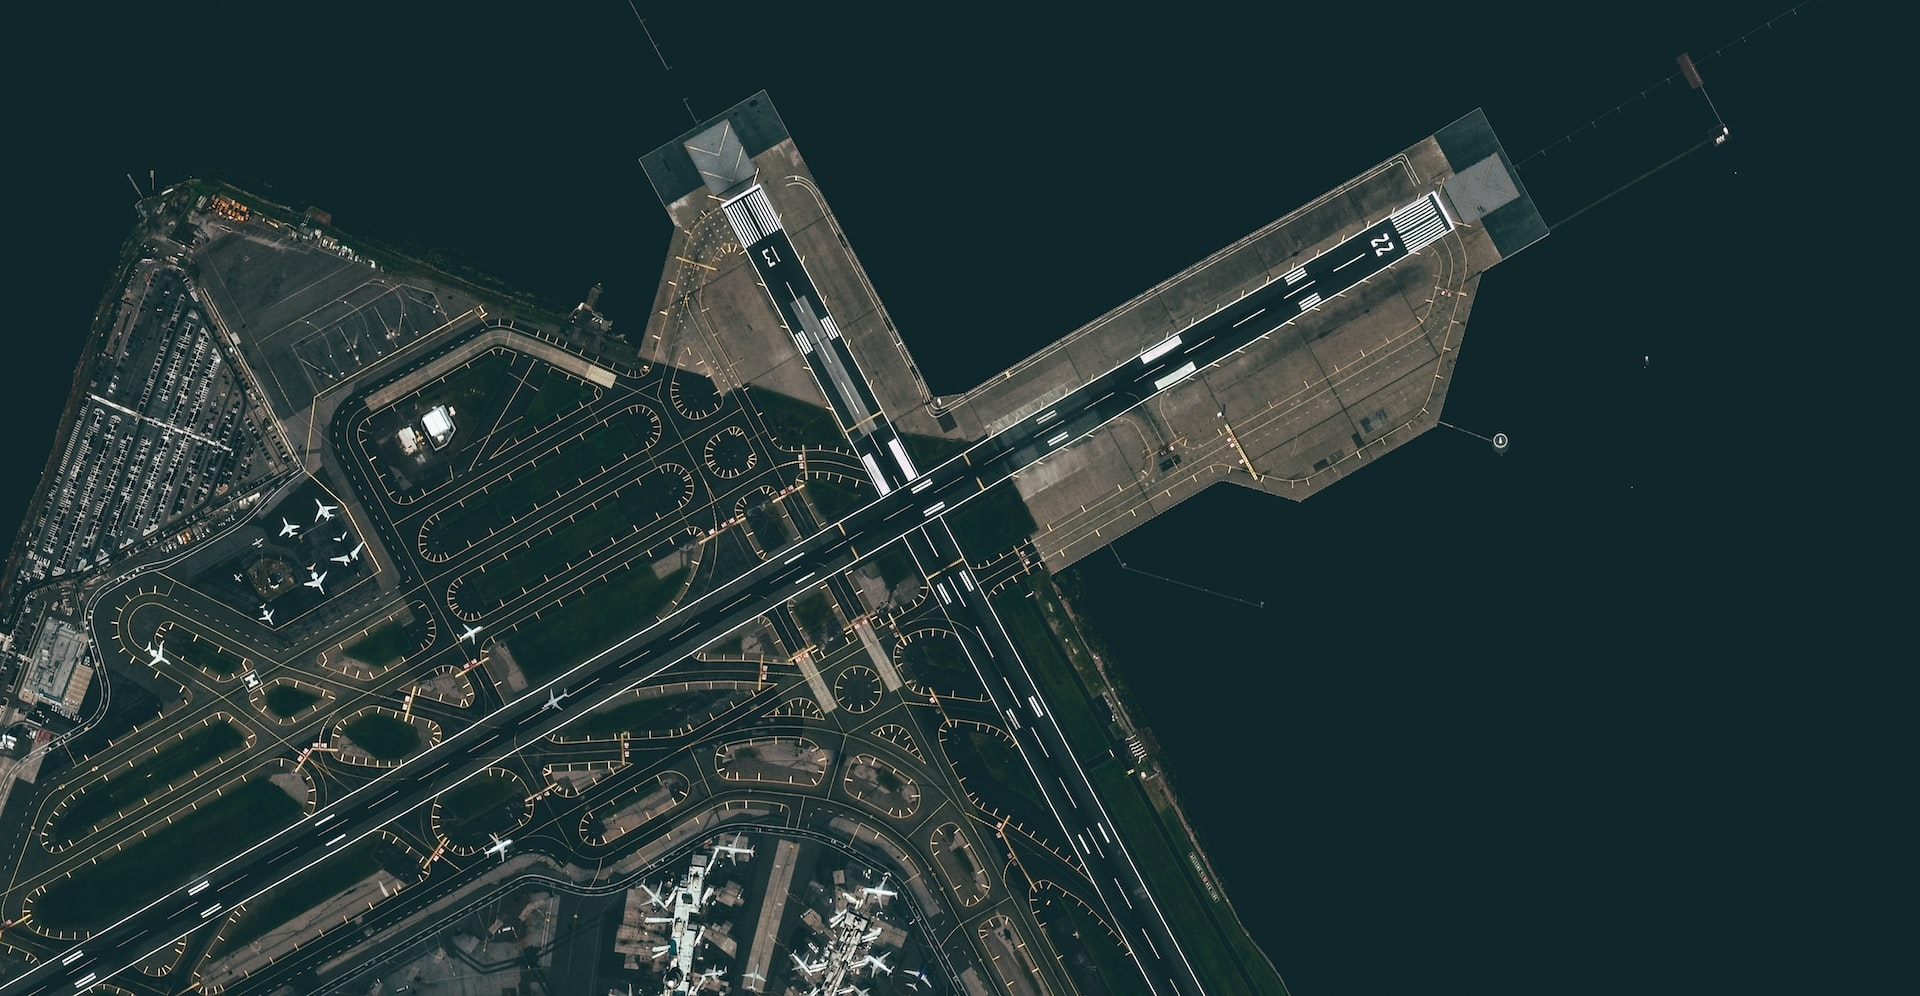 Two intersecting runways at an airport from a satellite.